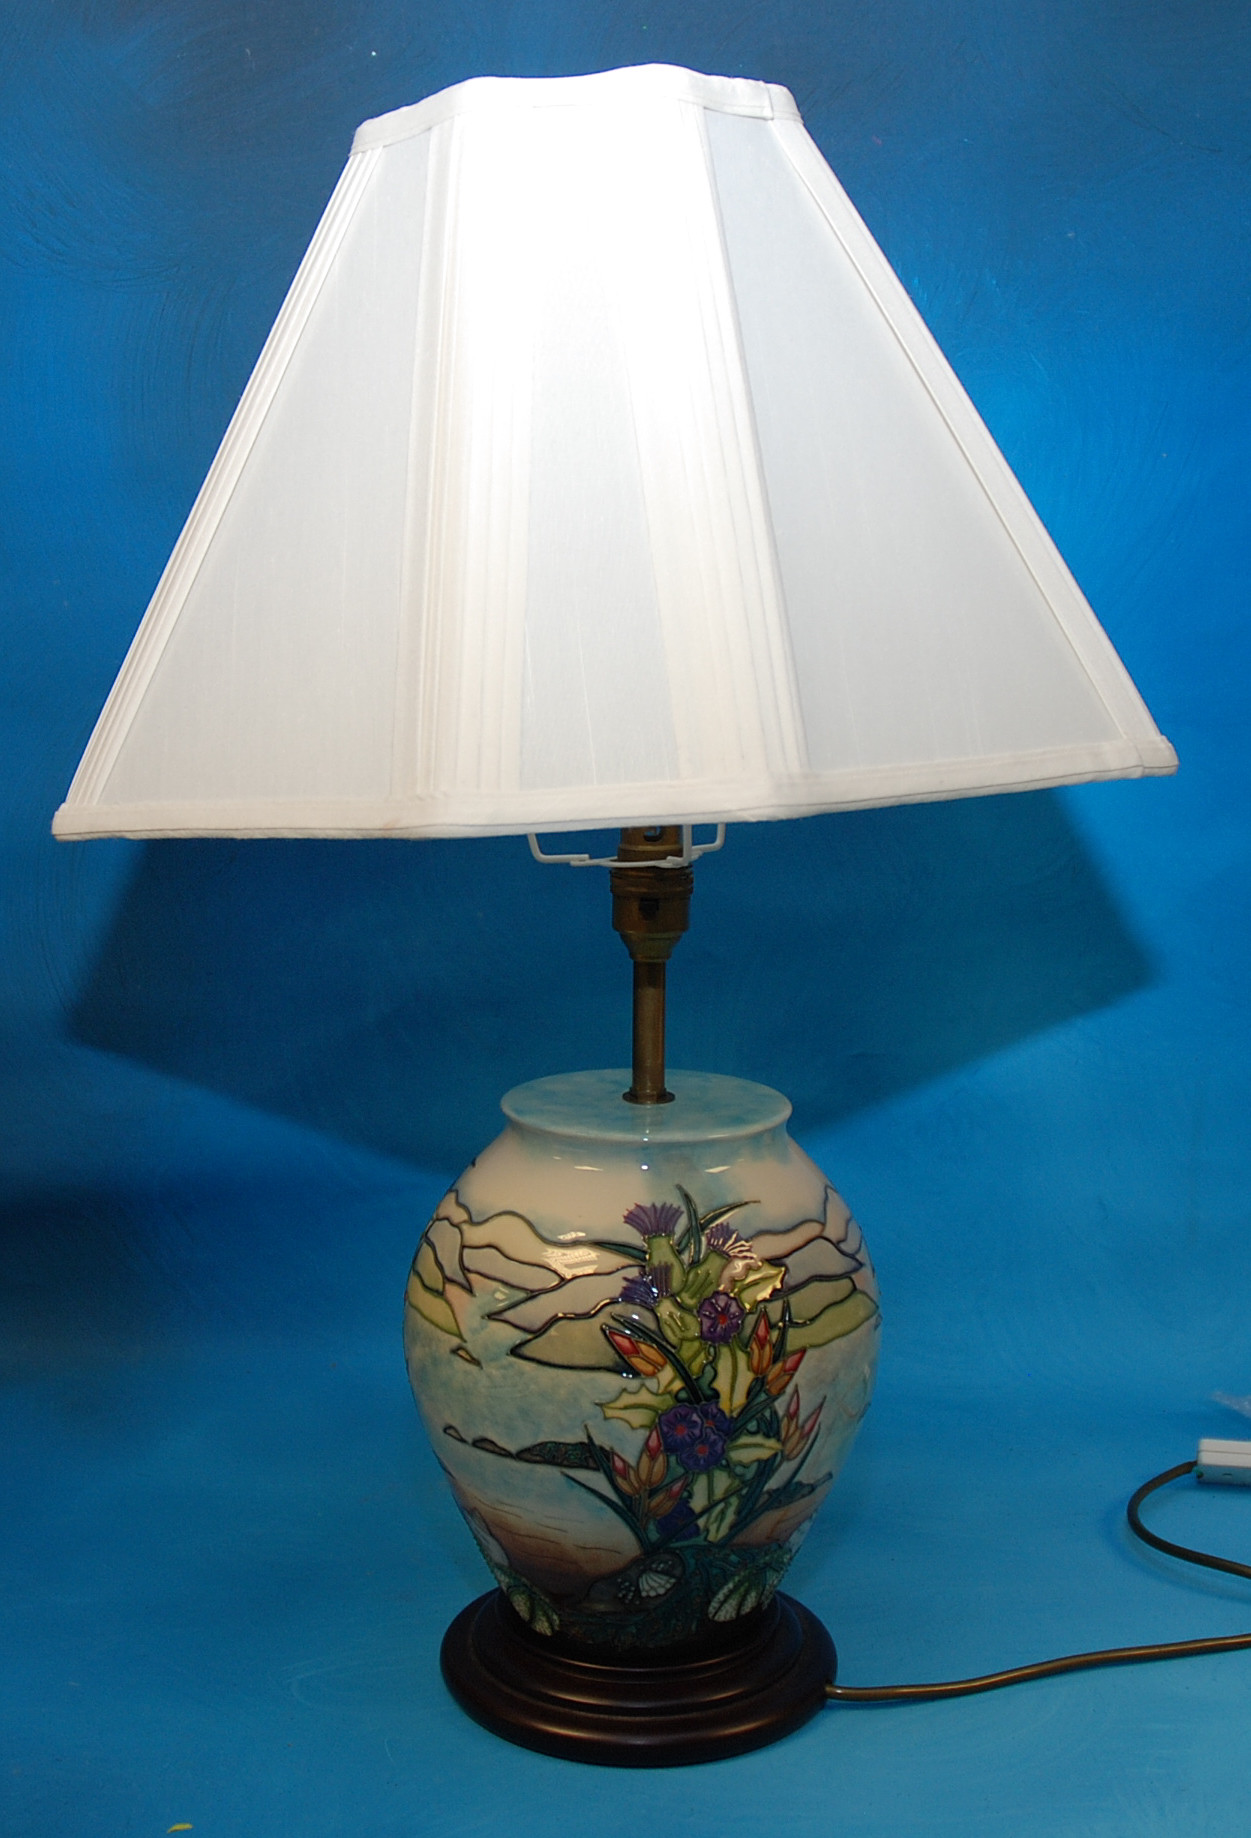 MOORCROFT LAMP AND SHADE "ISLAY" PATTERN - BASE 25CM, OVERALL APPROX 63CM